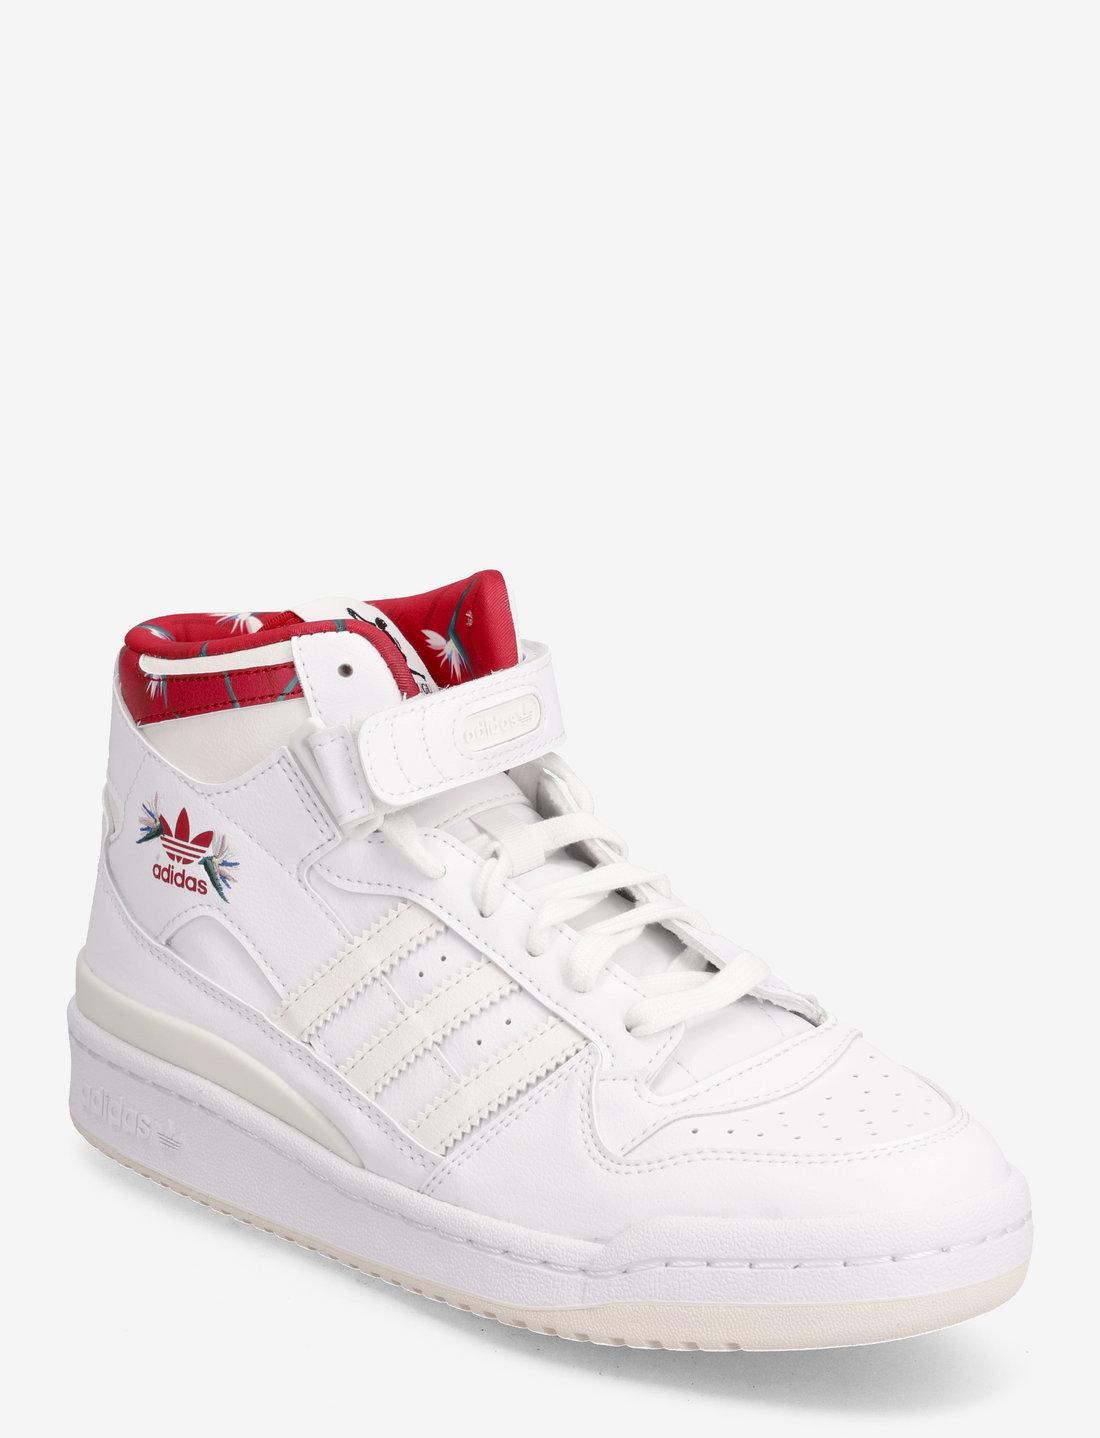 adidas Originals Forum Mid Thebe Magugu Shoes - High top sneakers